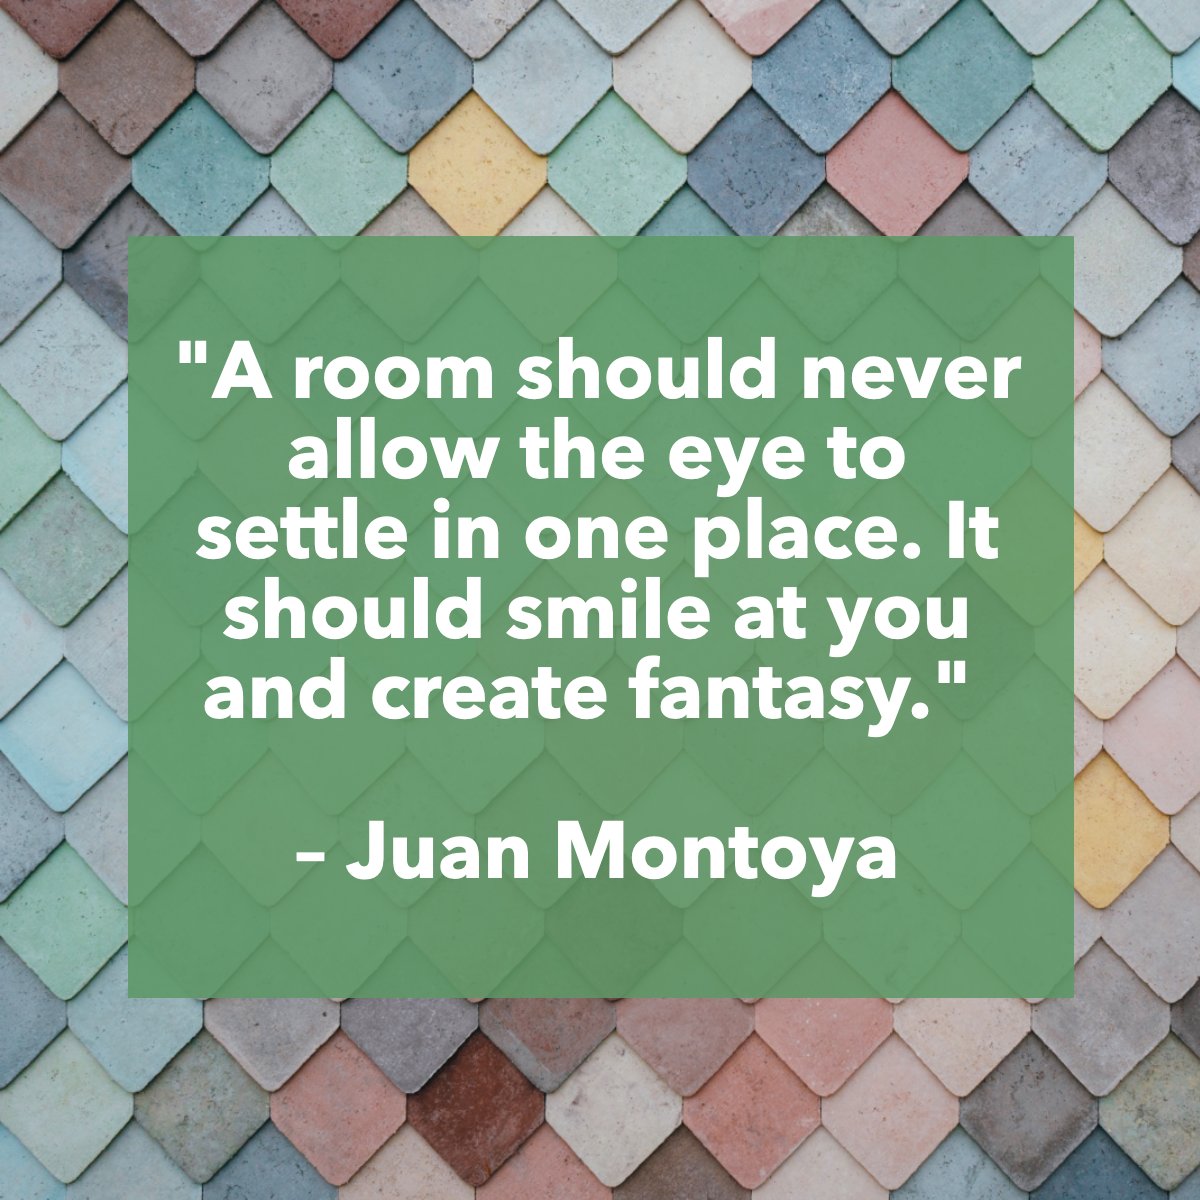 'A room should never allow the eye to settle in one place. It should smile at you and create fantasy.'
― Juan Montoya 📖

#design #roomdesign #decor #interior #inspiring #quote #quoteoftheday